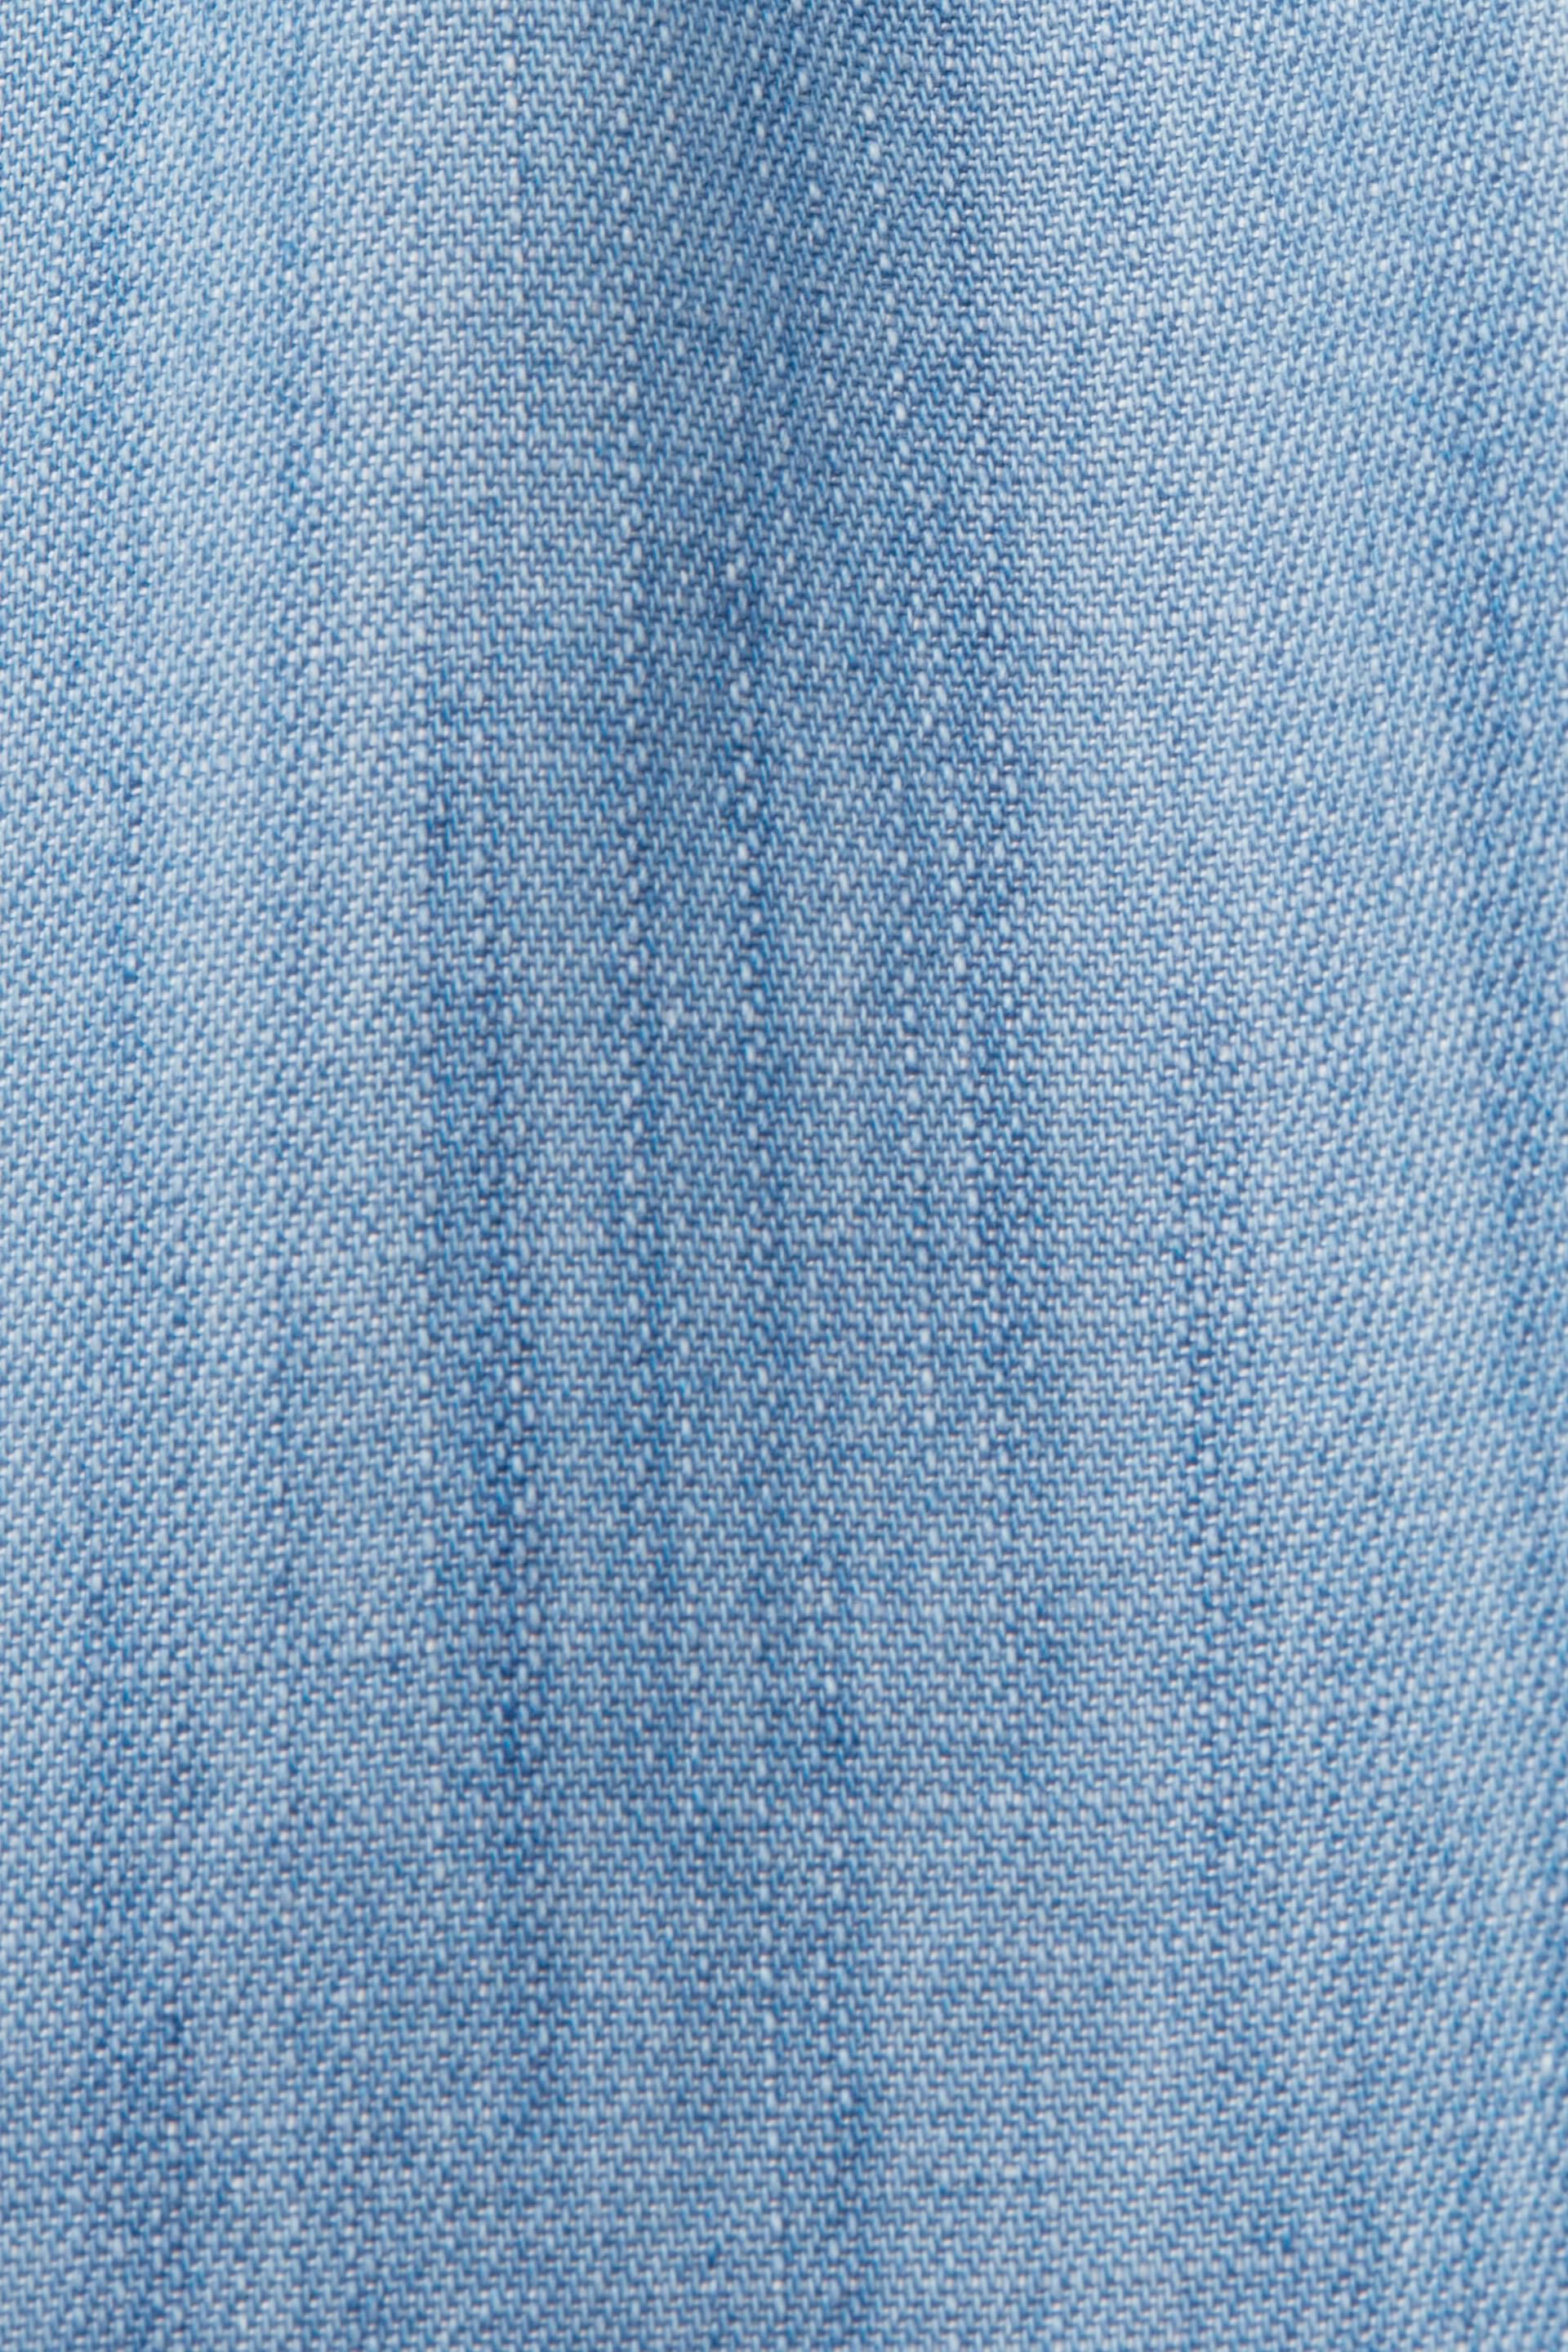 Amazon.com: Washed Denim Fabric - 100% Cotton - 6 Oz (Thin & Lightweight) -  Sold by The Yard - 60